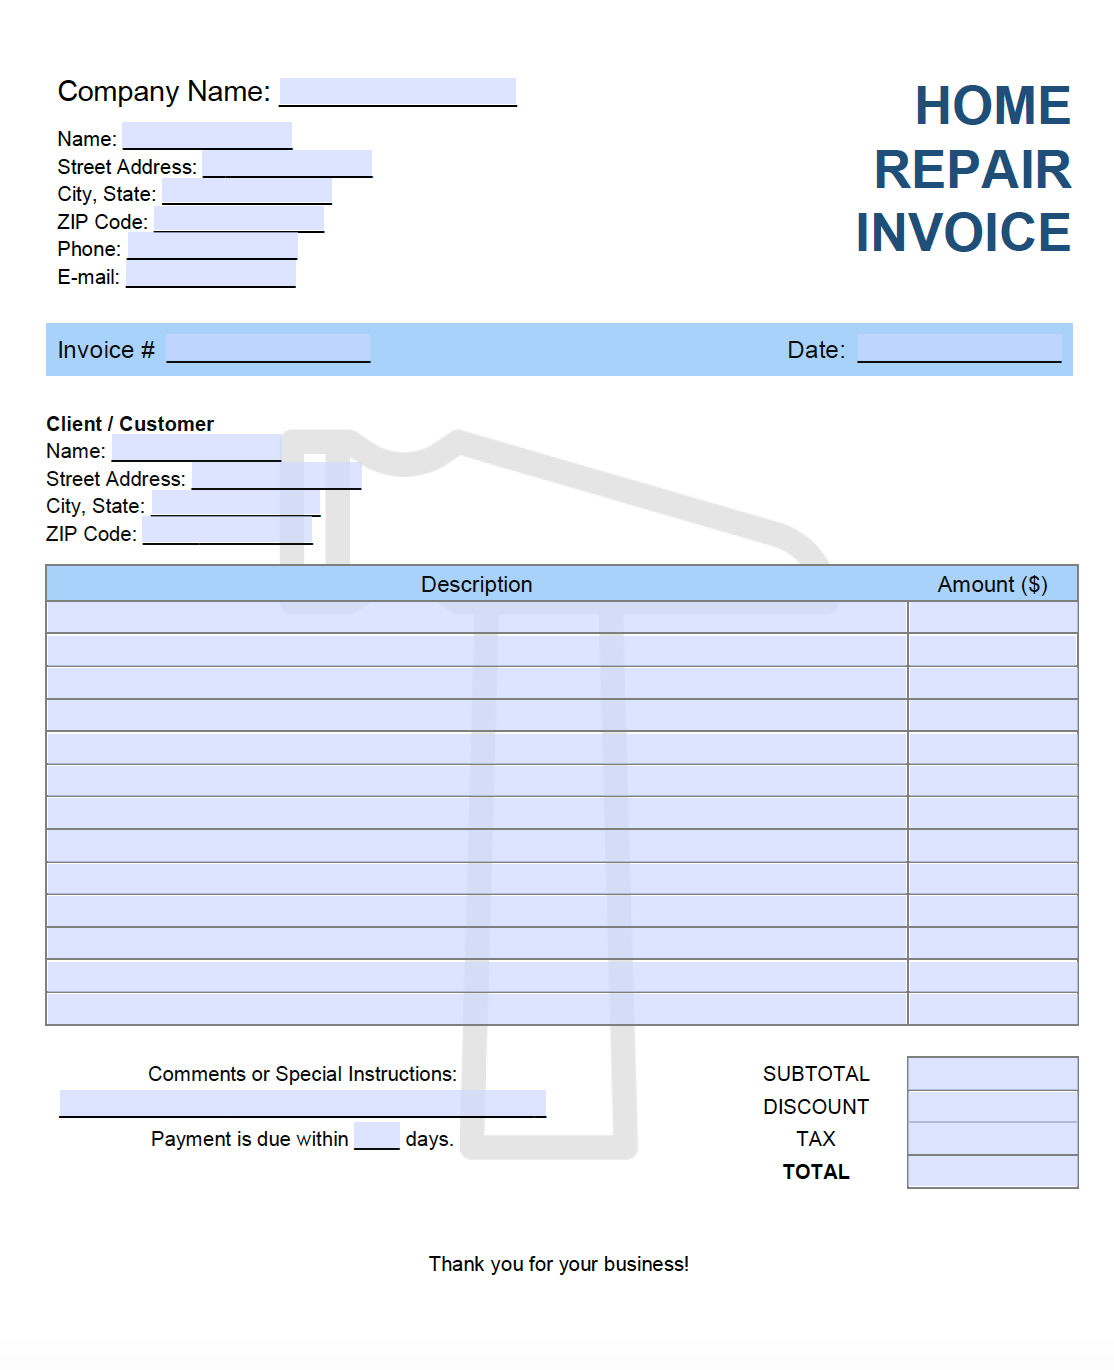 Free Home Repair Invoice Template  PDF  WORD  EXCEL Pertaining To Mechanics Invoice Template